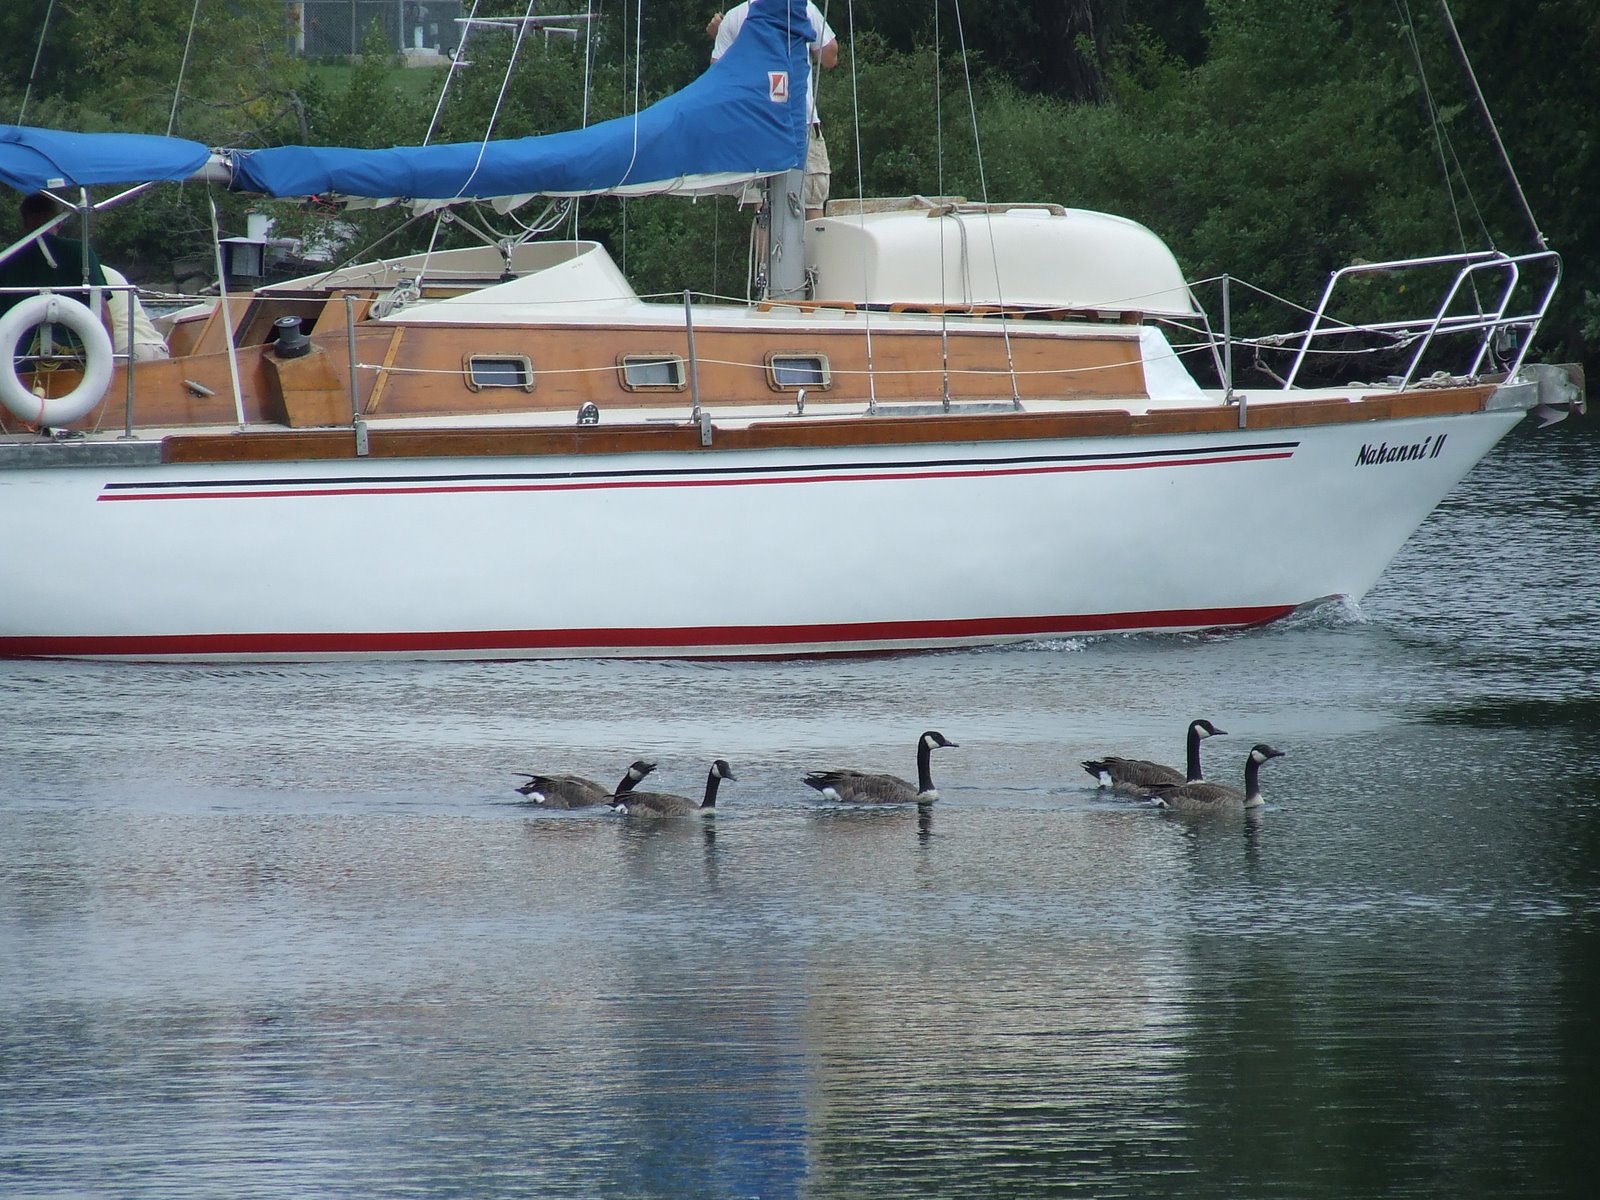 Some duckies competing against a boat. They did better in the flying round.